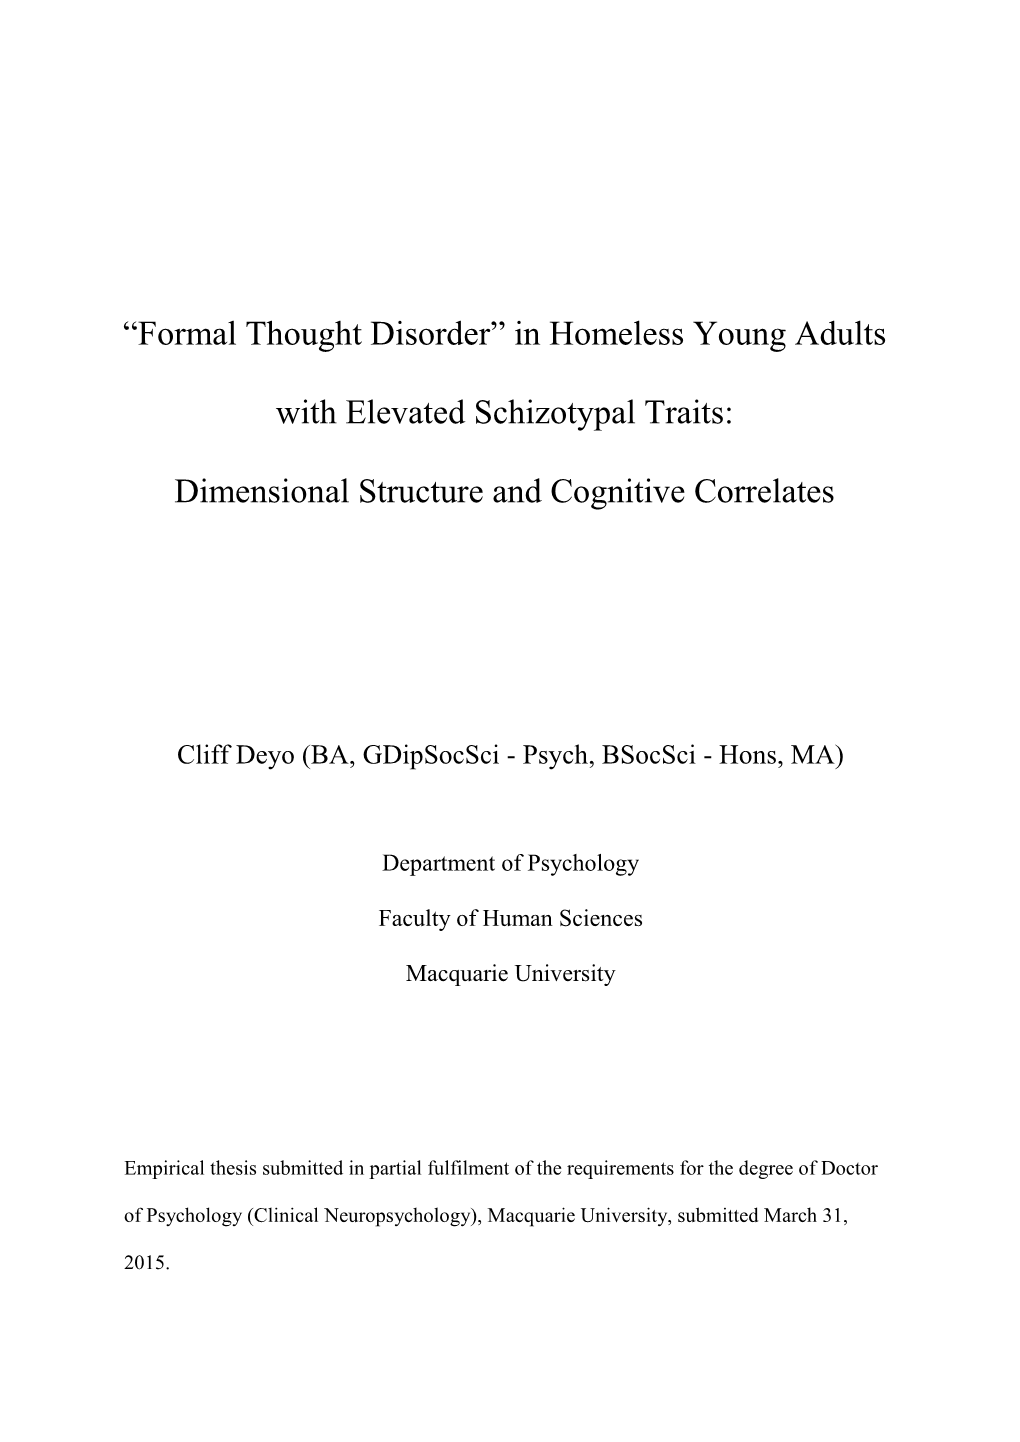 “Formal Thought Disorder” in Homeless Young Adults with Elevated Schizotypal Traits: Underlying Dimensional Structure…